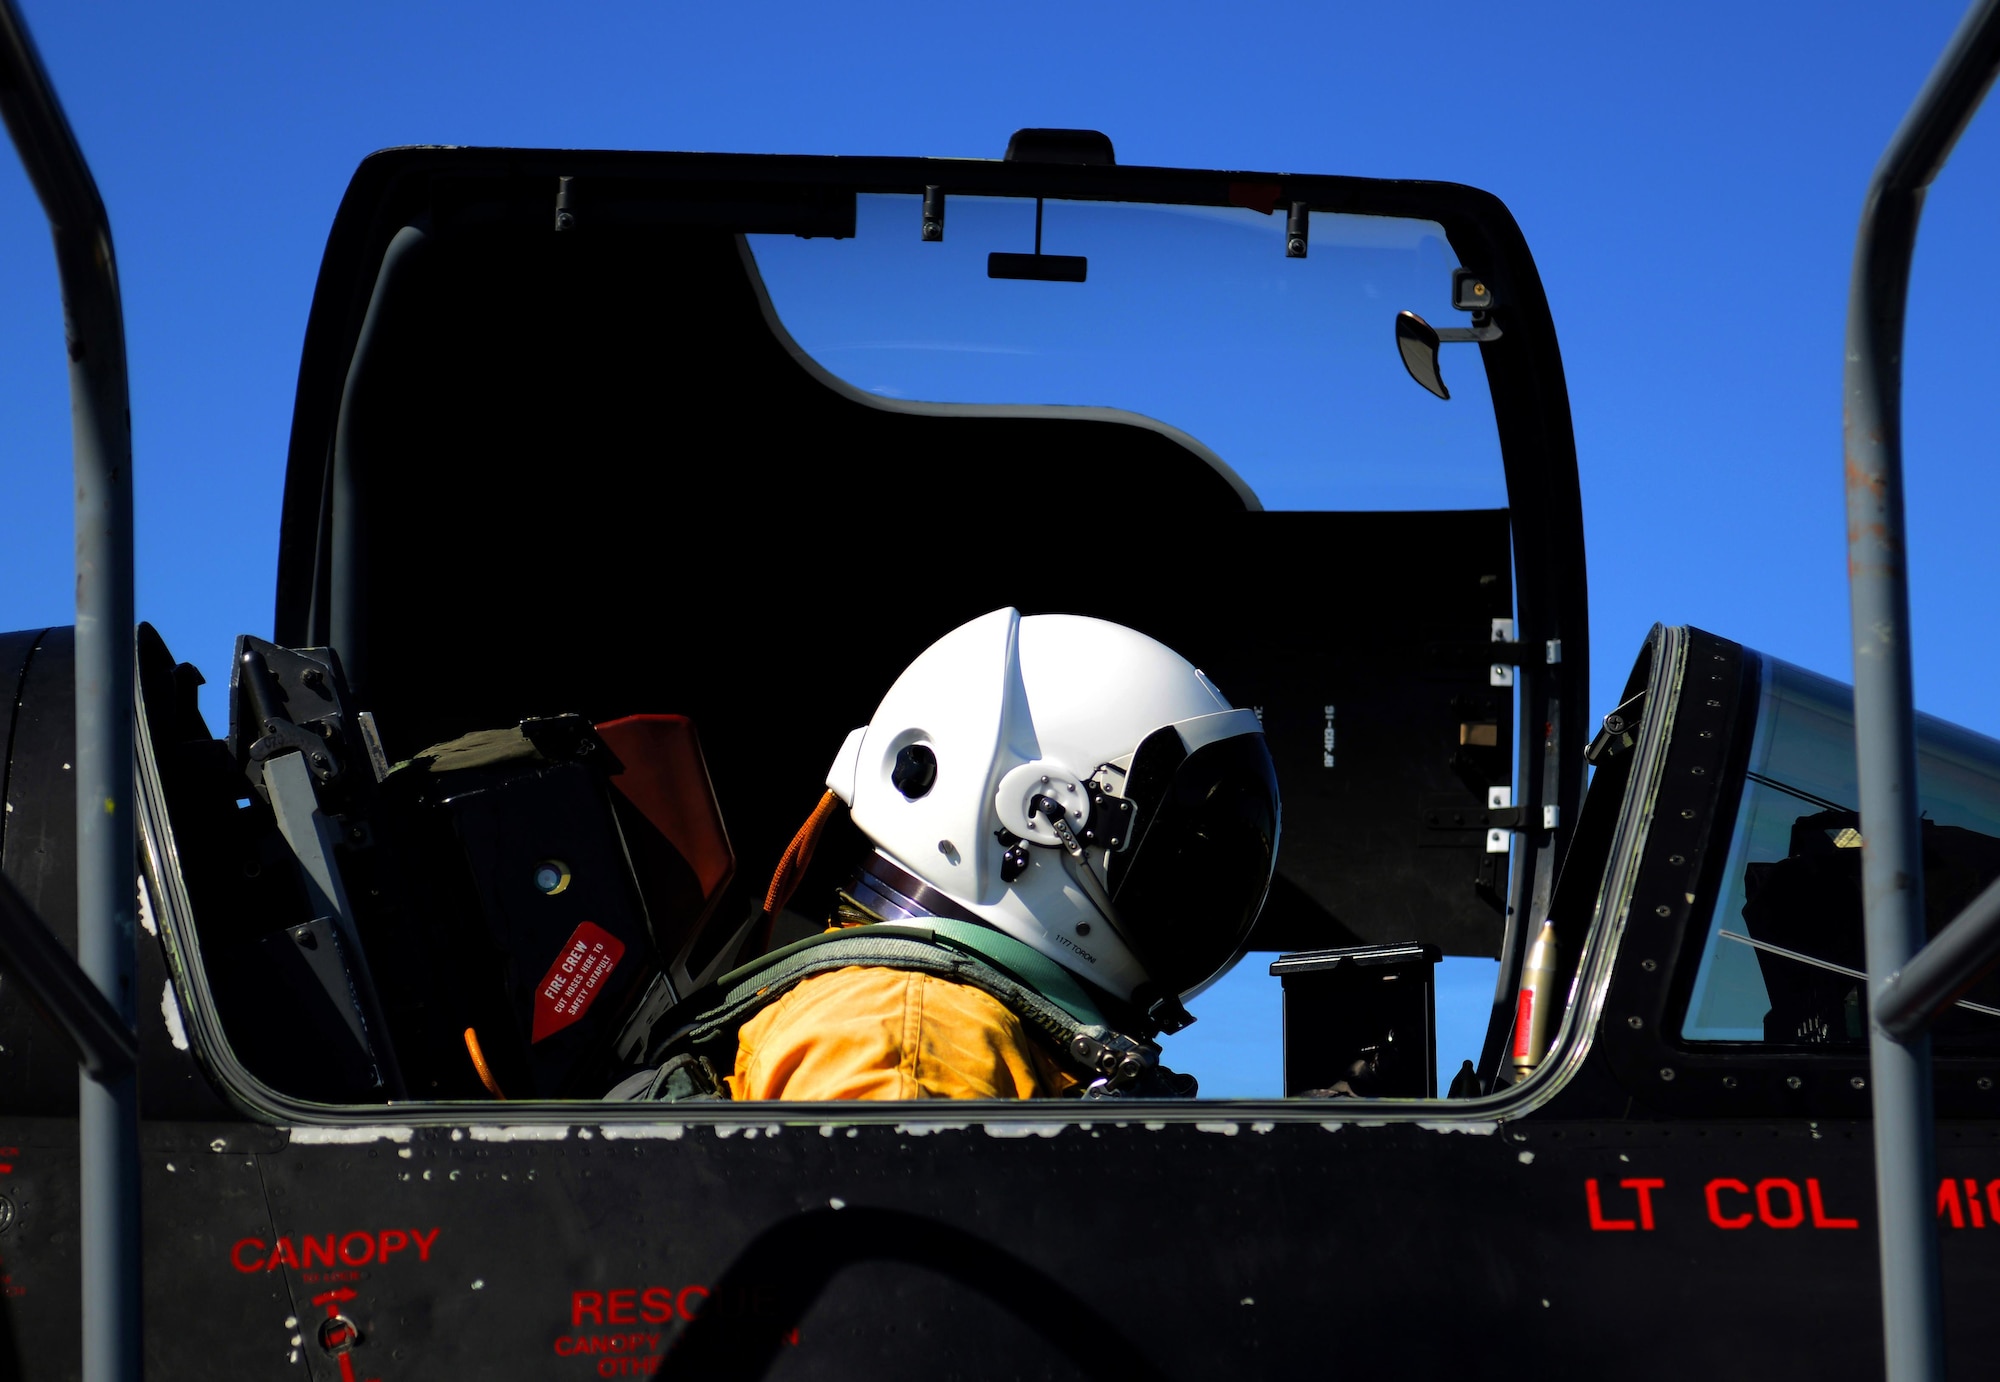 A U-2 Dragon Lady pilot prepares to take off during exercise Northern Edge 17 at Joint Base Elmendorf-Richardson, Alaska, May 11, 2017. The joint training exercise is focused on interoperability and hosting approximately 6,000 service members, 200 fixed-wing aircraft and provides the Army, Navy, Air Force, Marines and Coast Guard with critical training. (U.S. Air Force photo/Staff Sgt. Jeffrey Schultze)